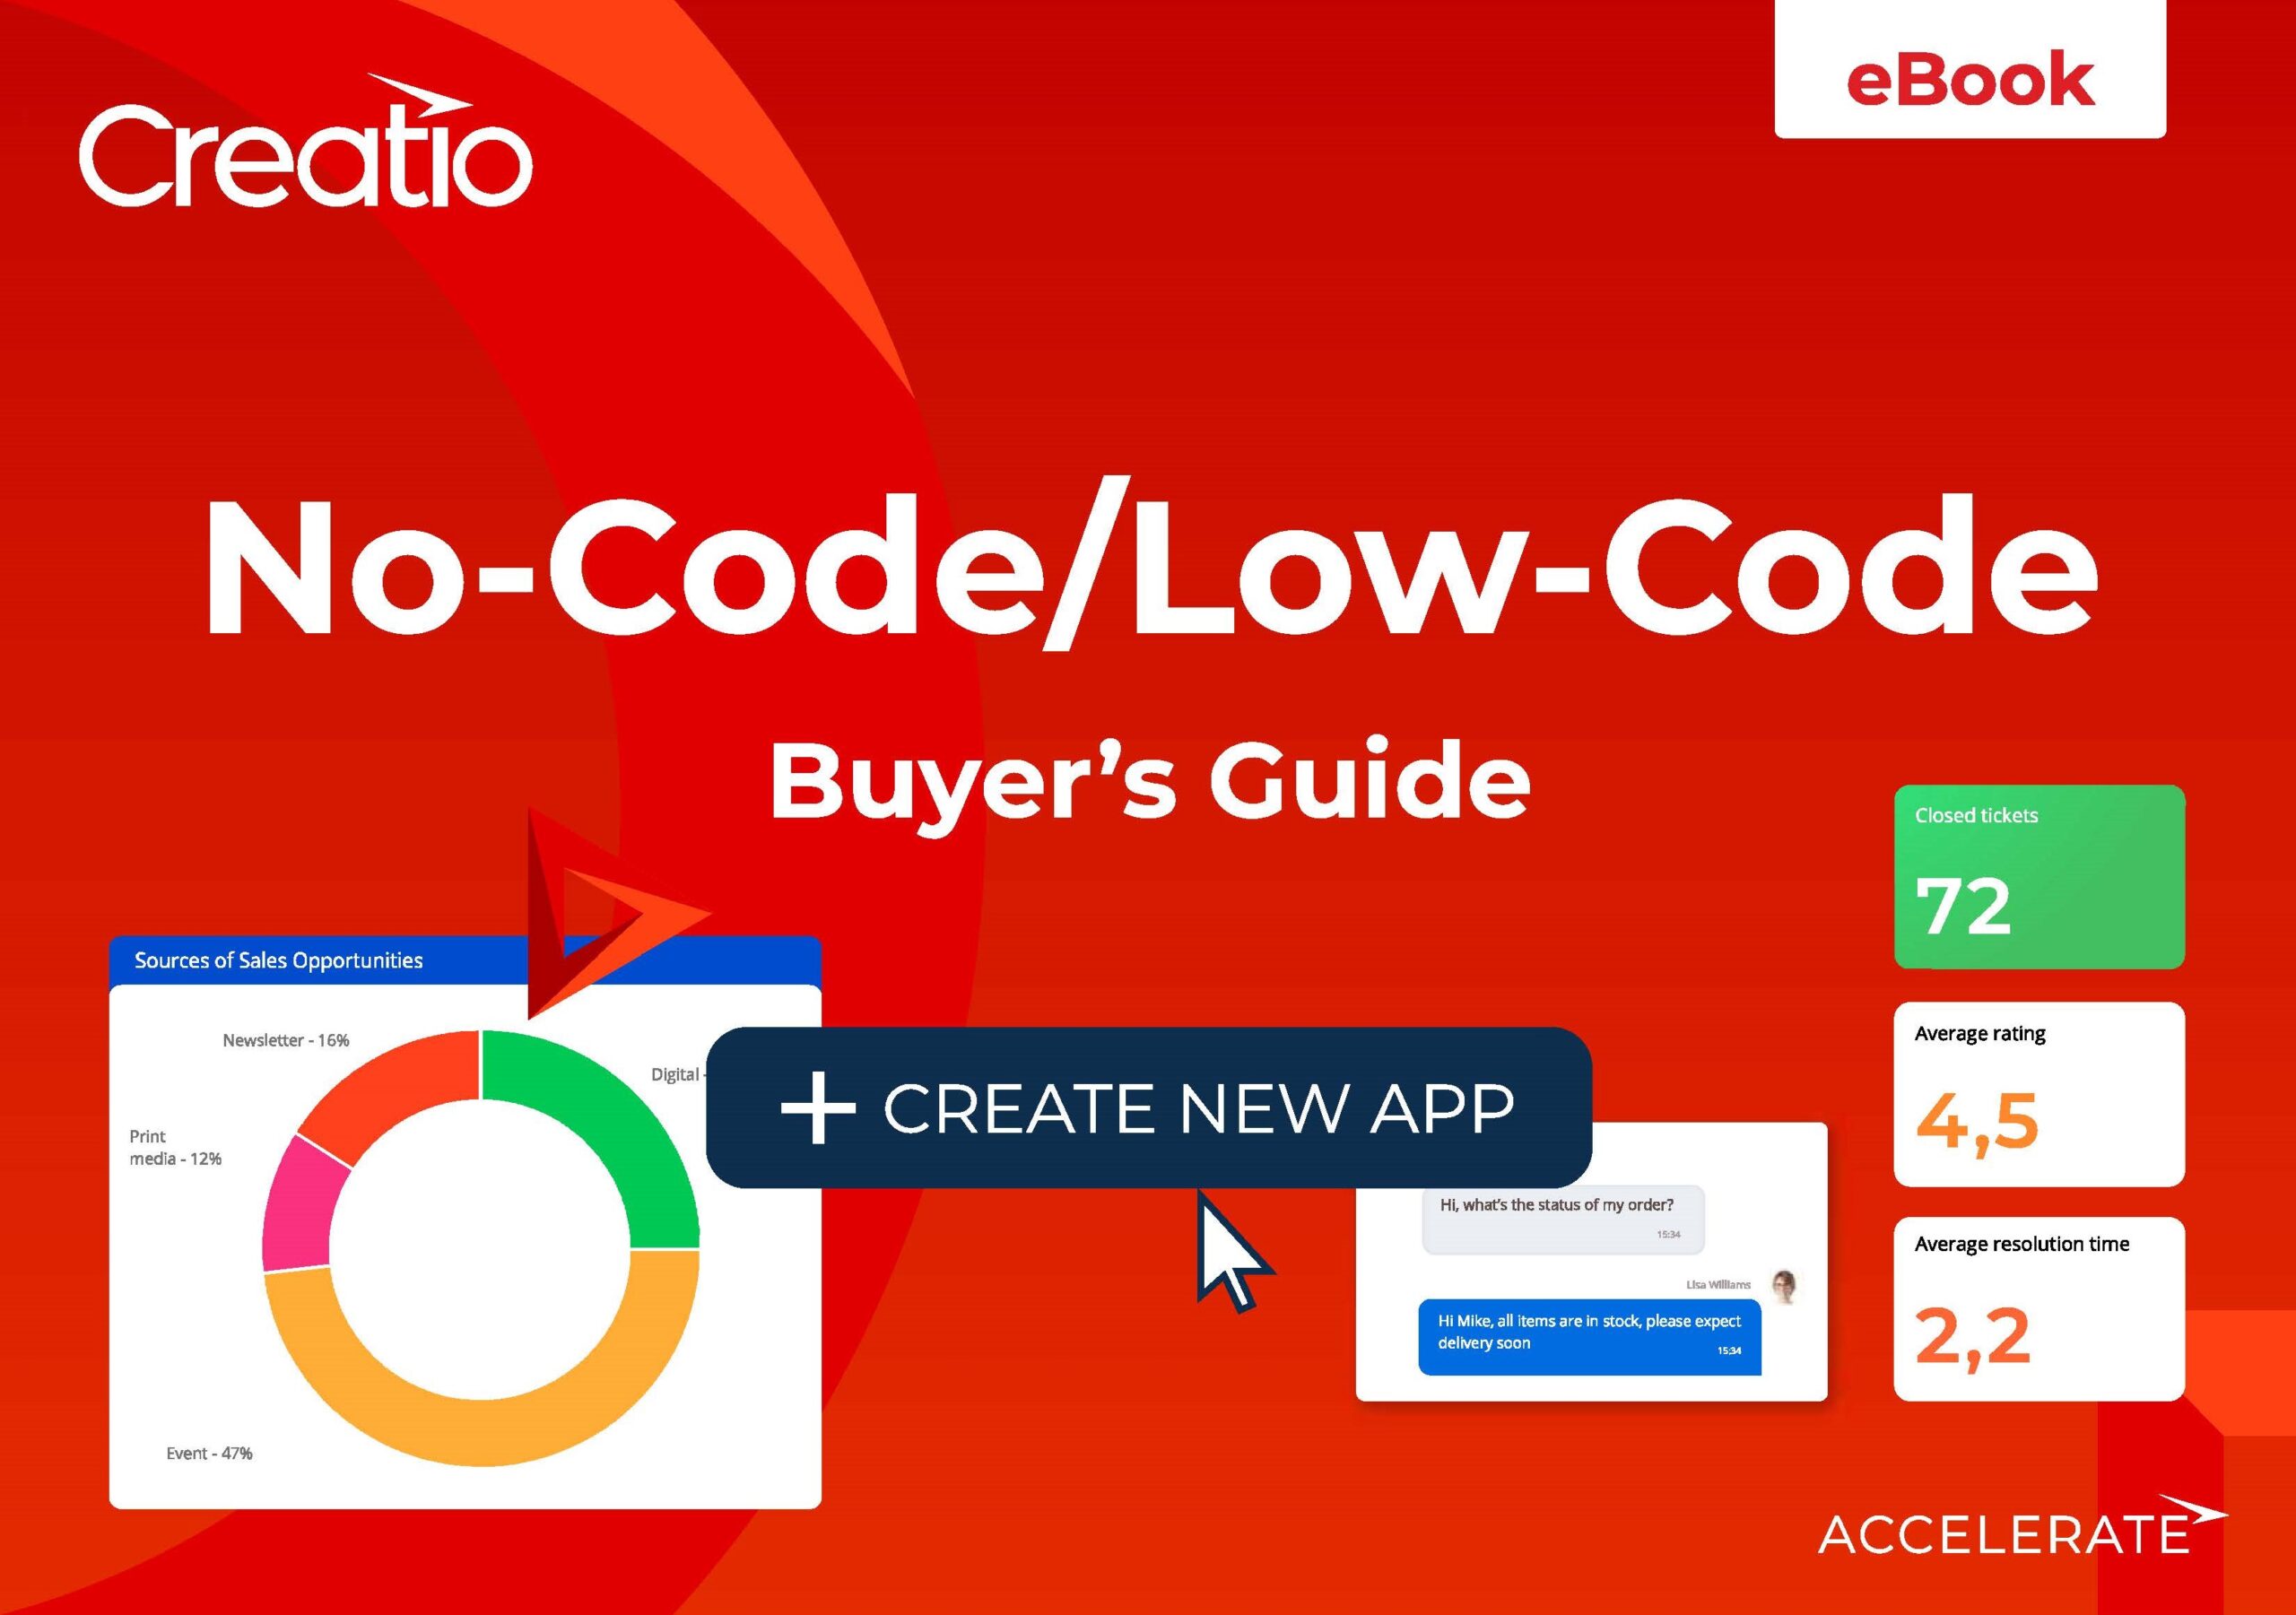 No-Code/Low-Code buyers guide front cover